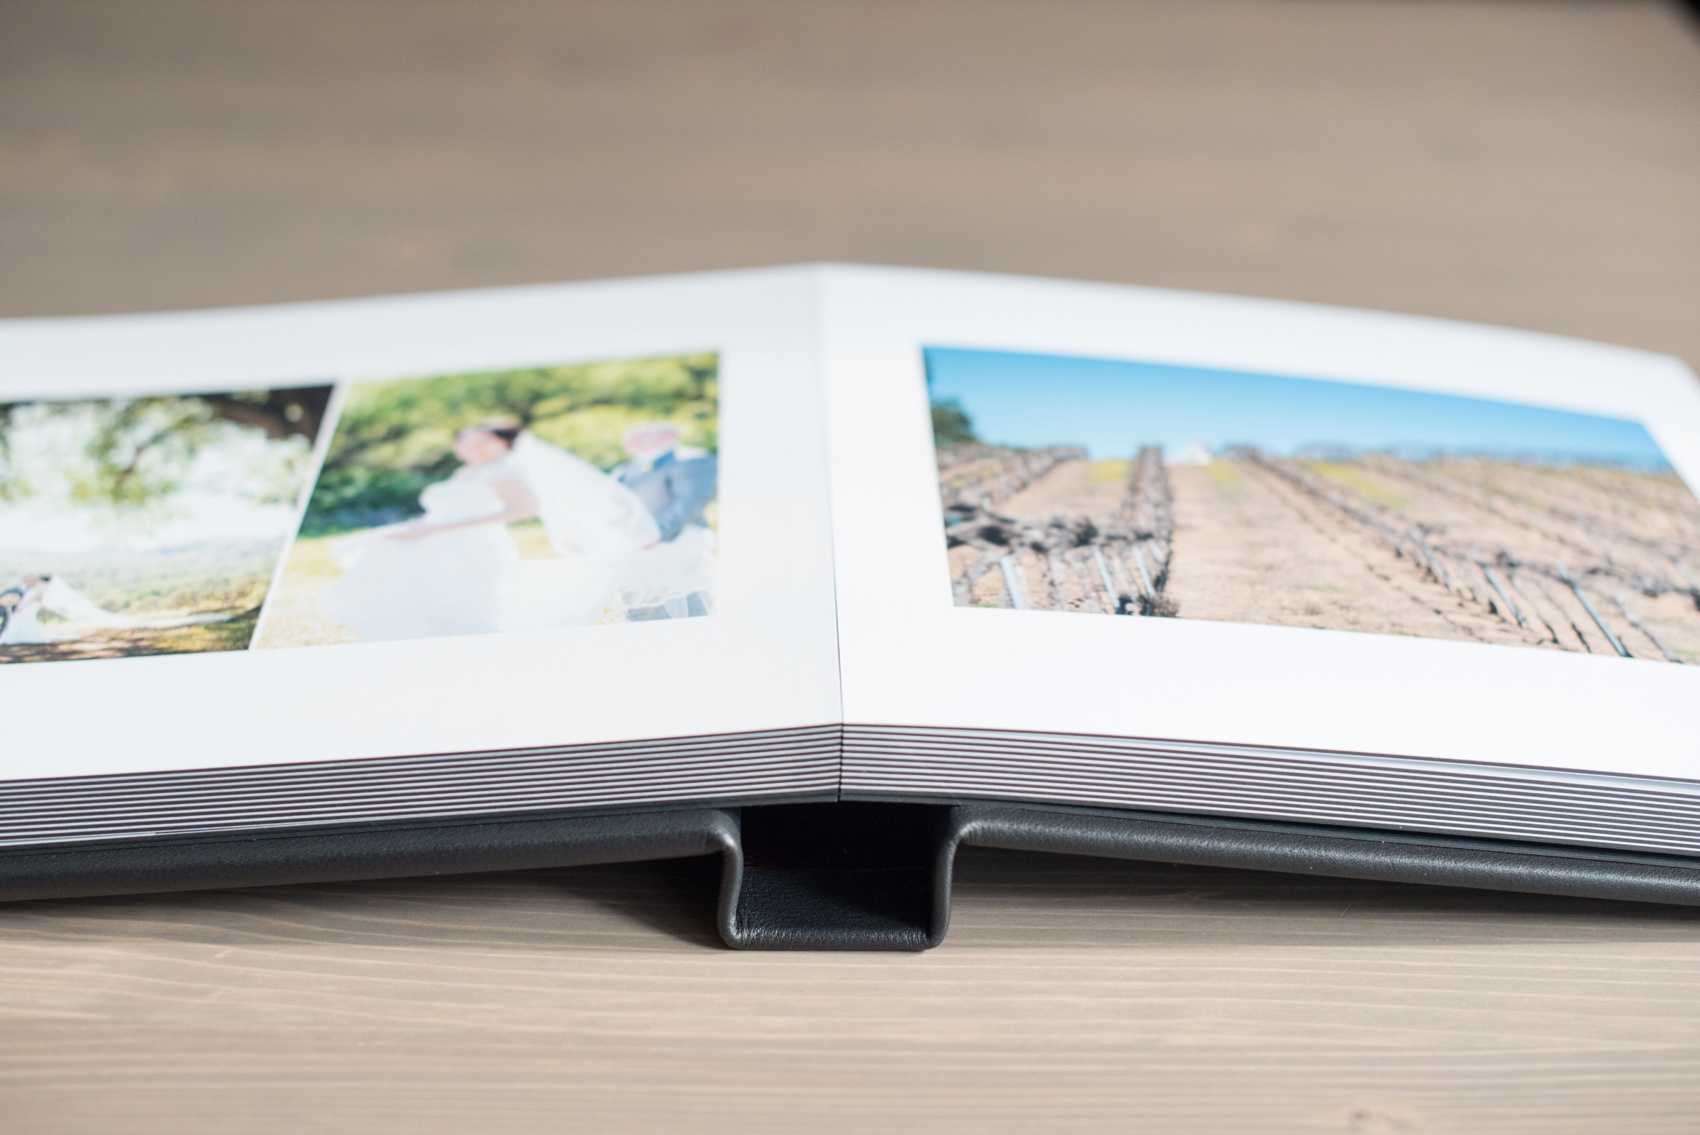 Fine art leather wedding album by Mikkel Paige Photography, manufactured by Madera.